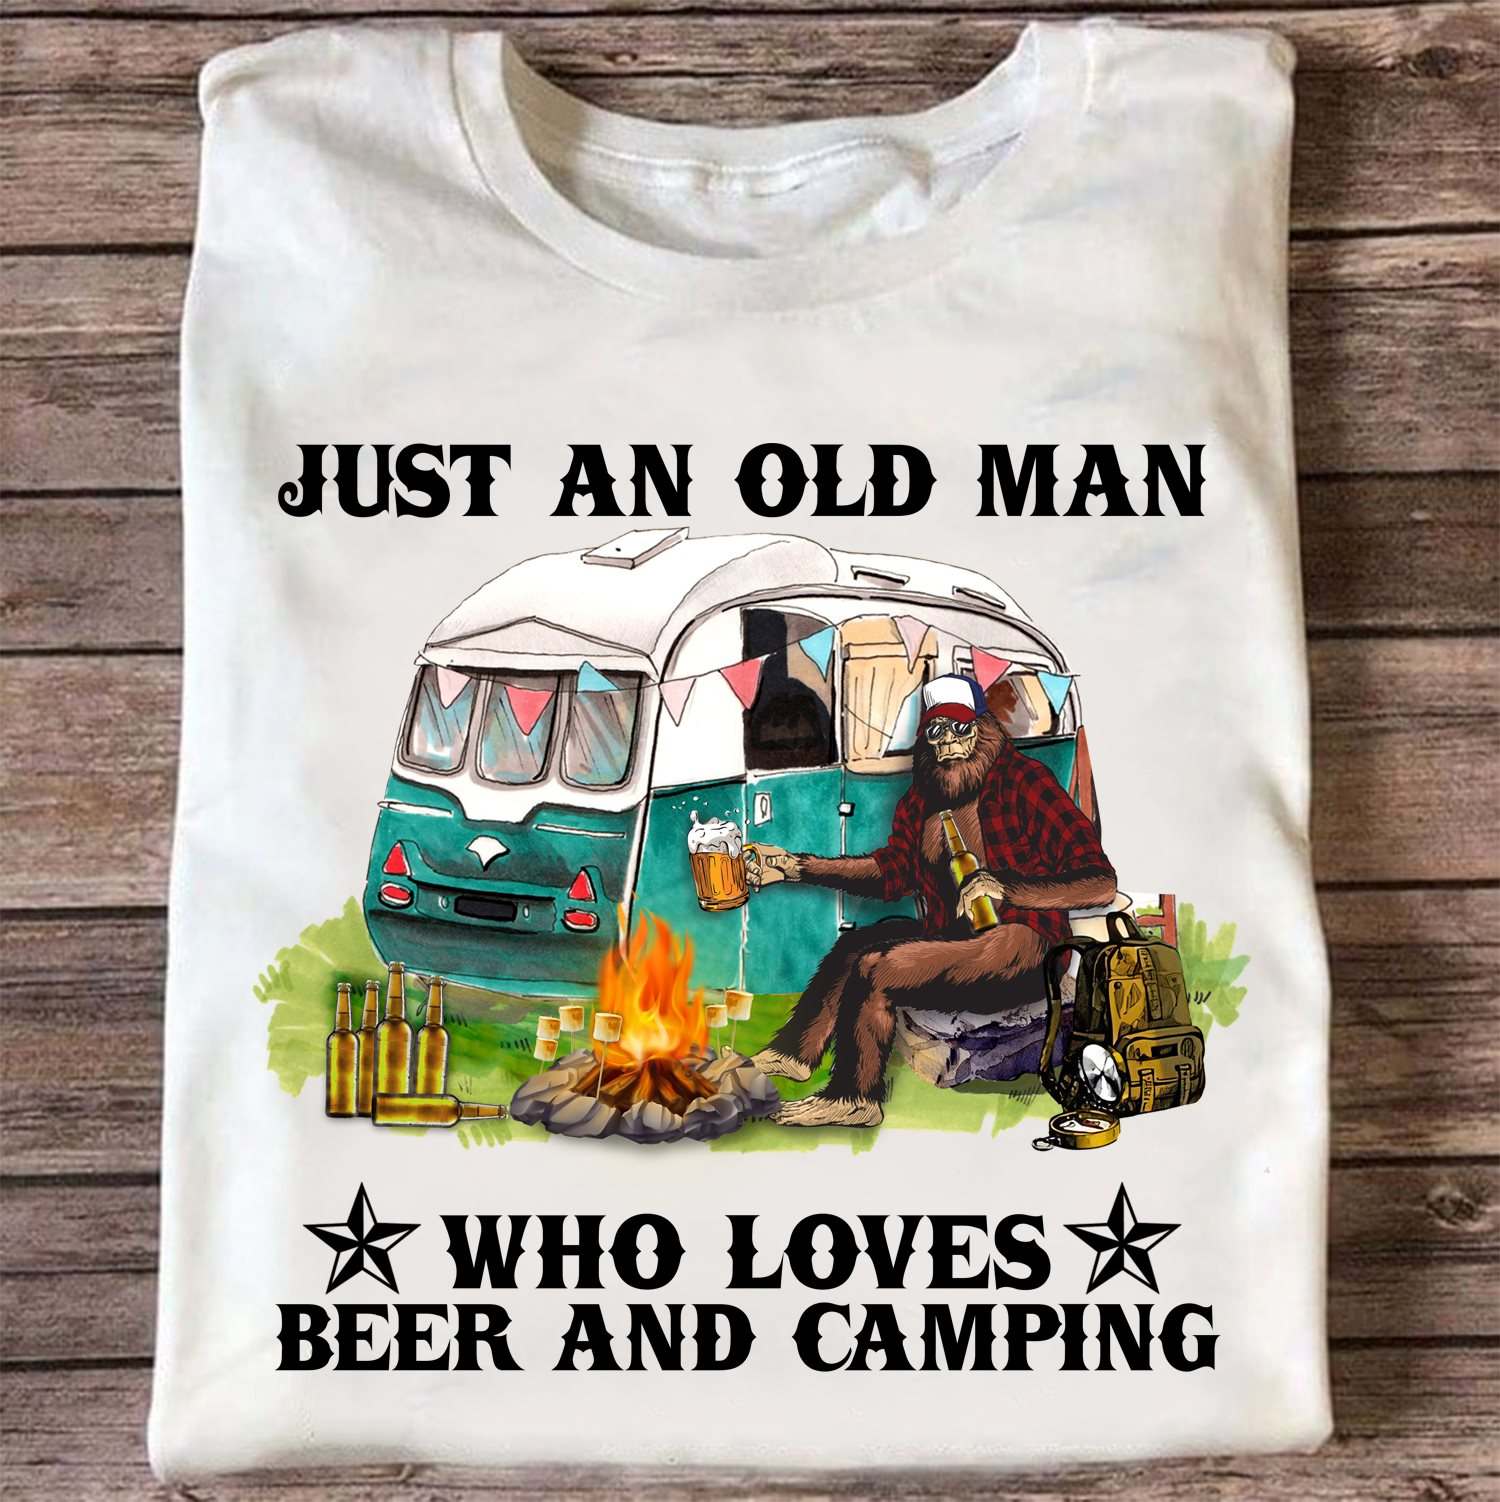 Just an old man who loves beer and camping - Beer lover, old man camping